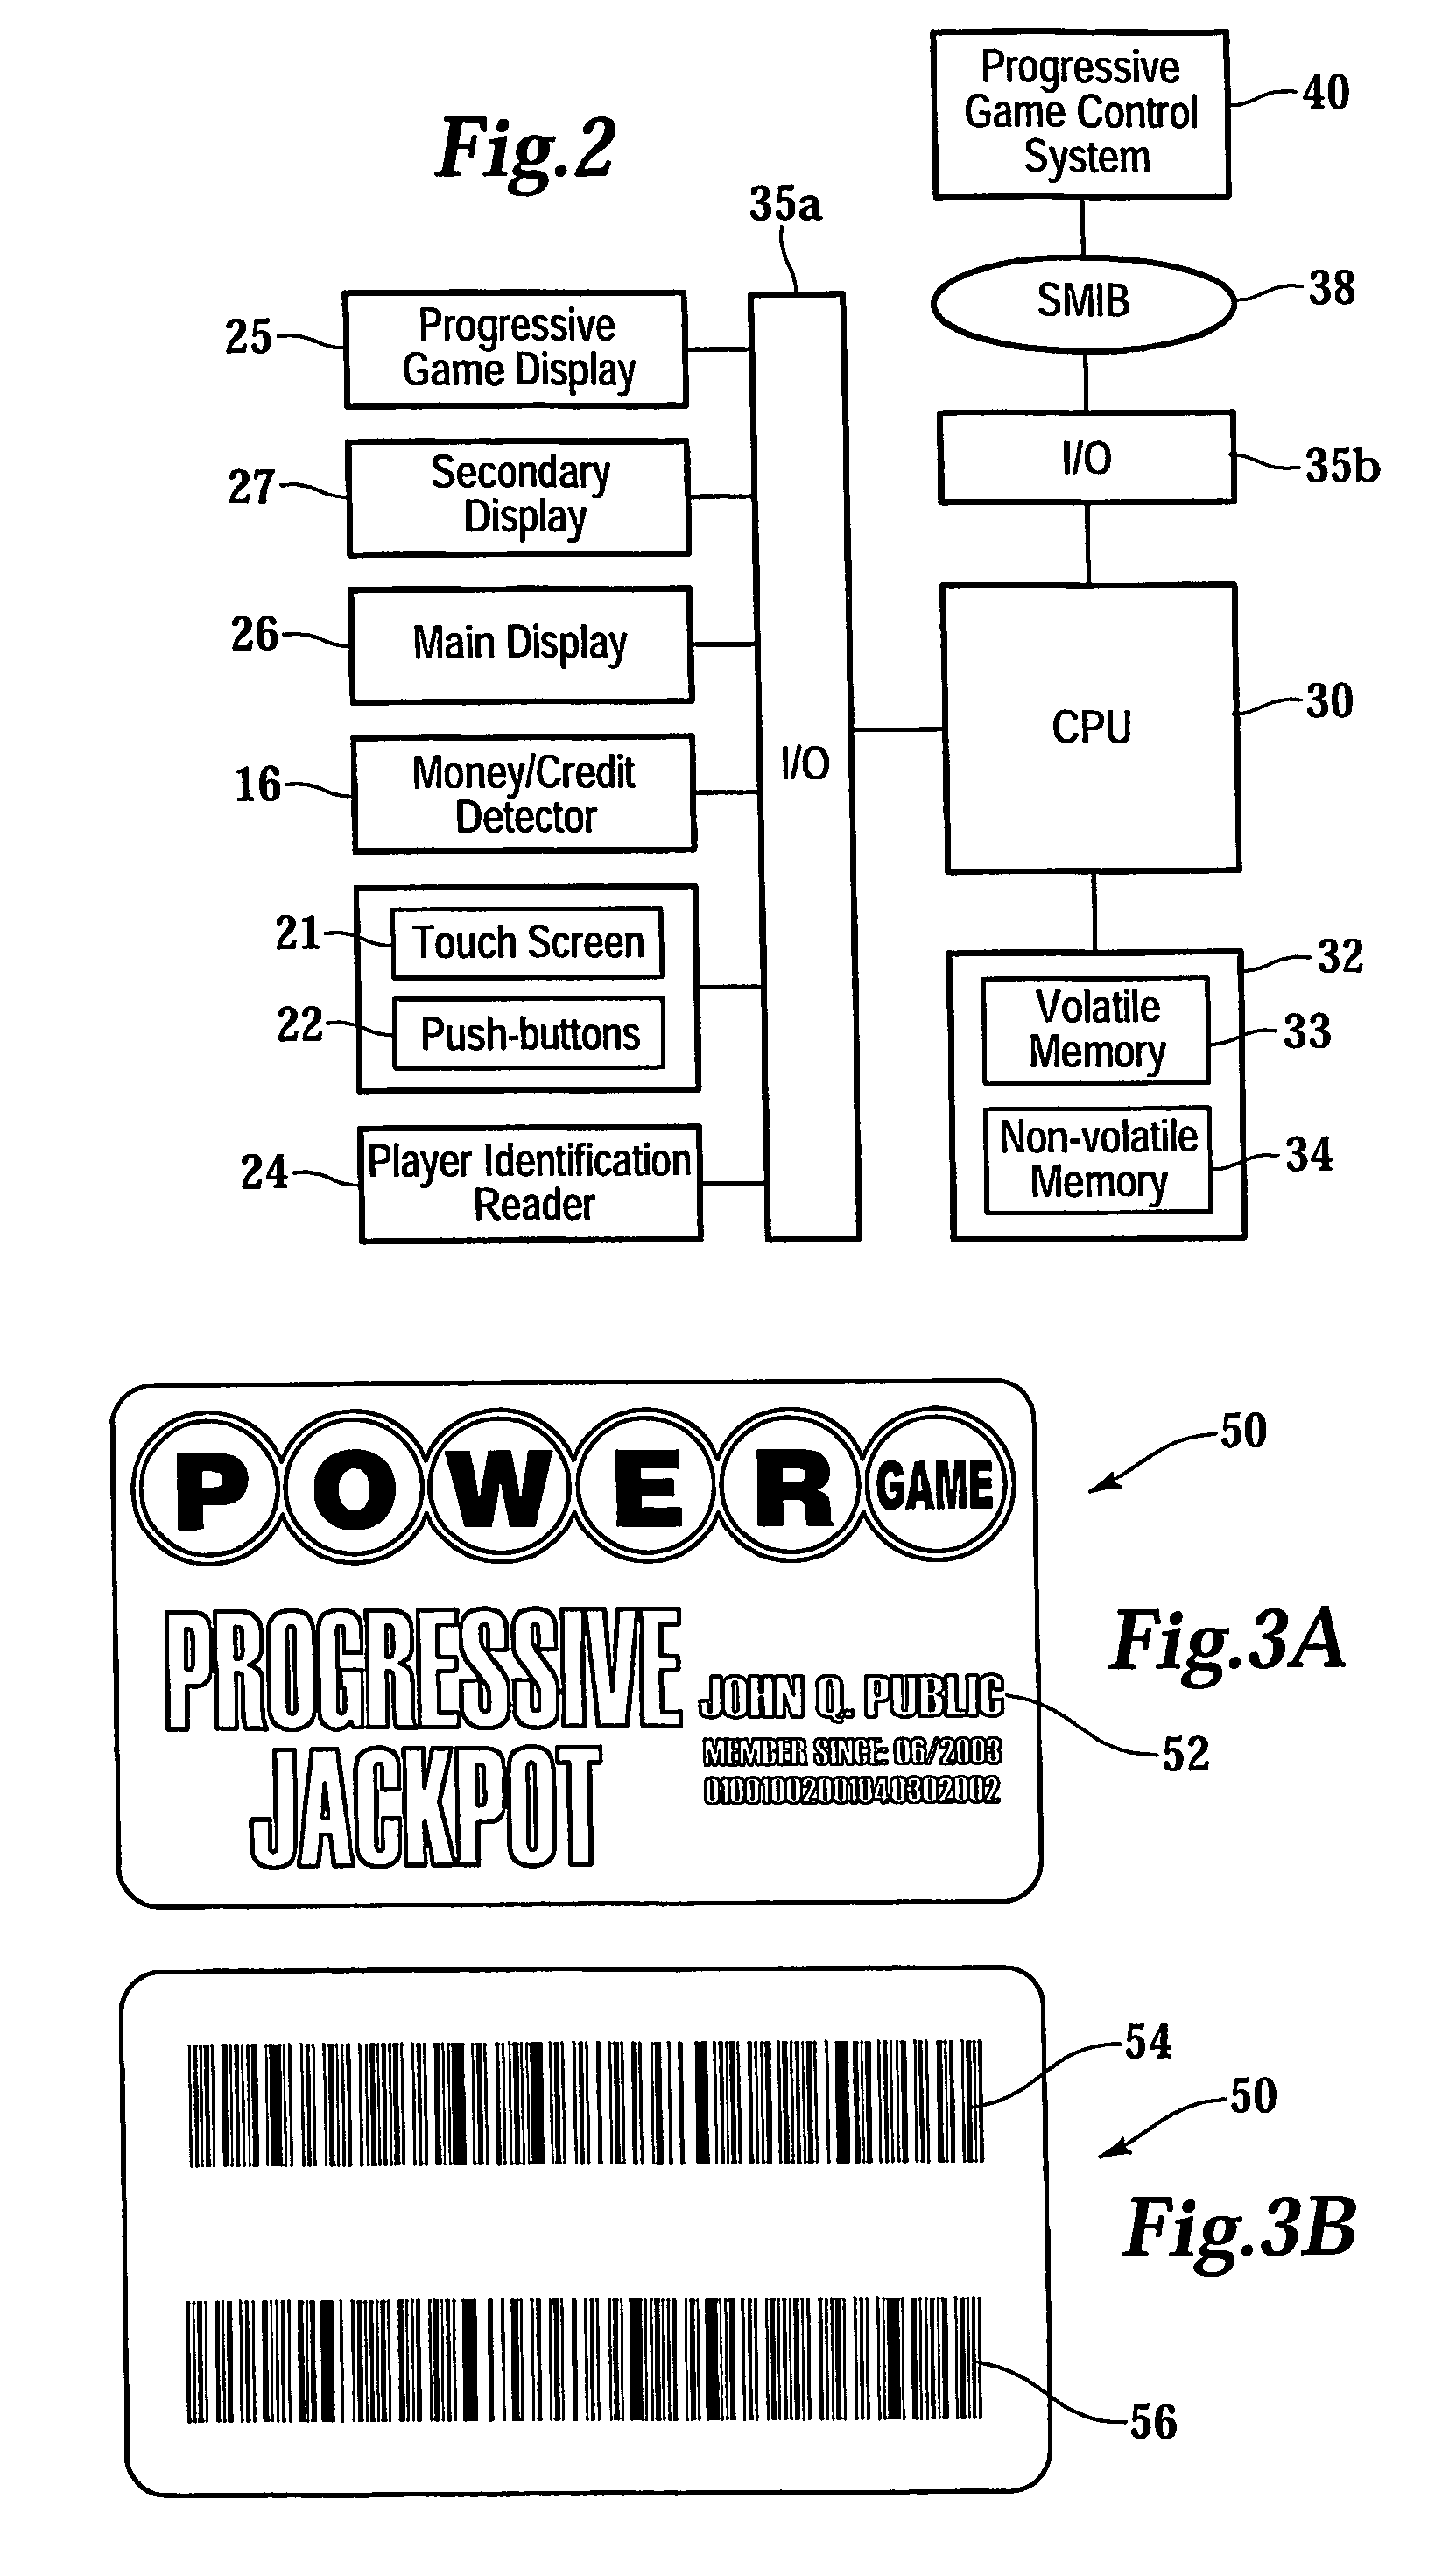 Gaming network for use in a restricted-access progressive game